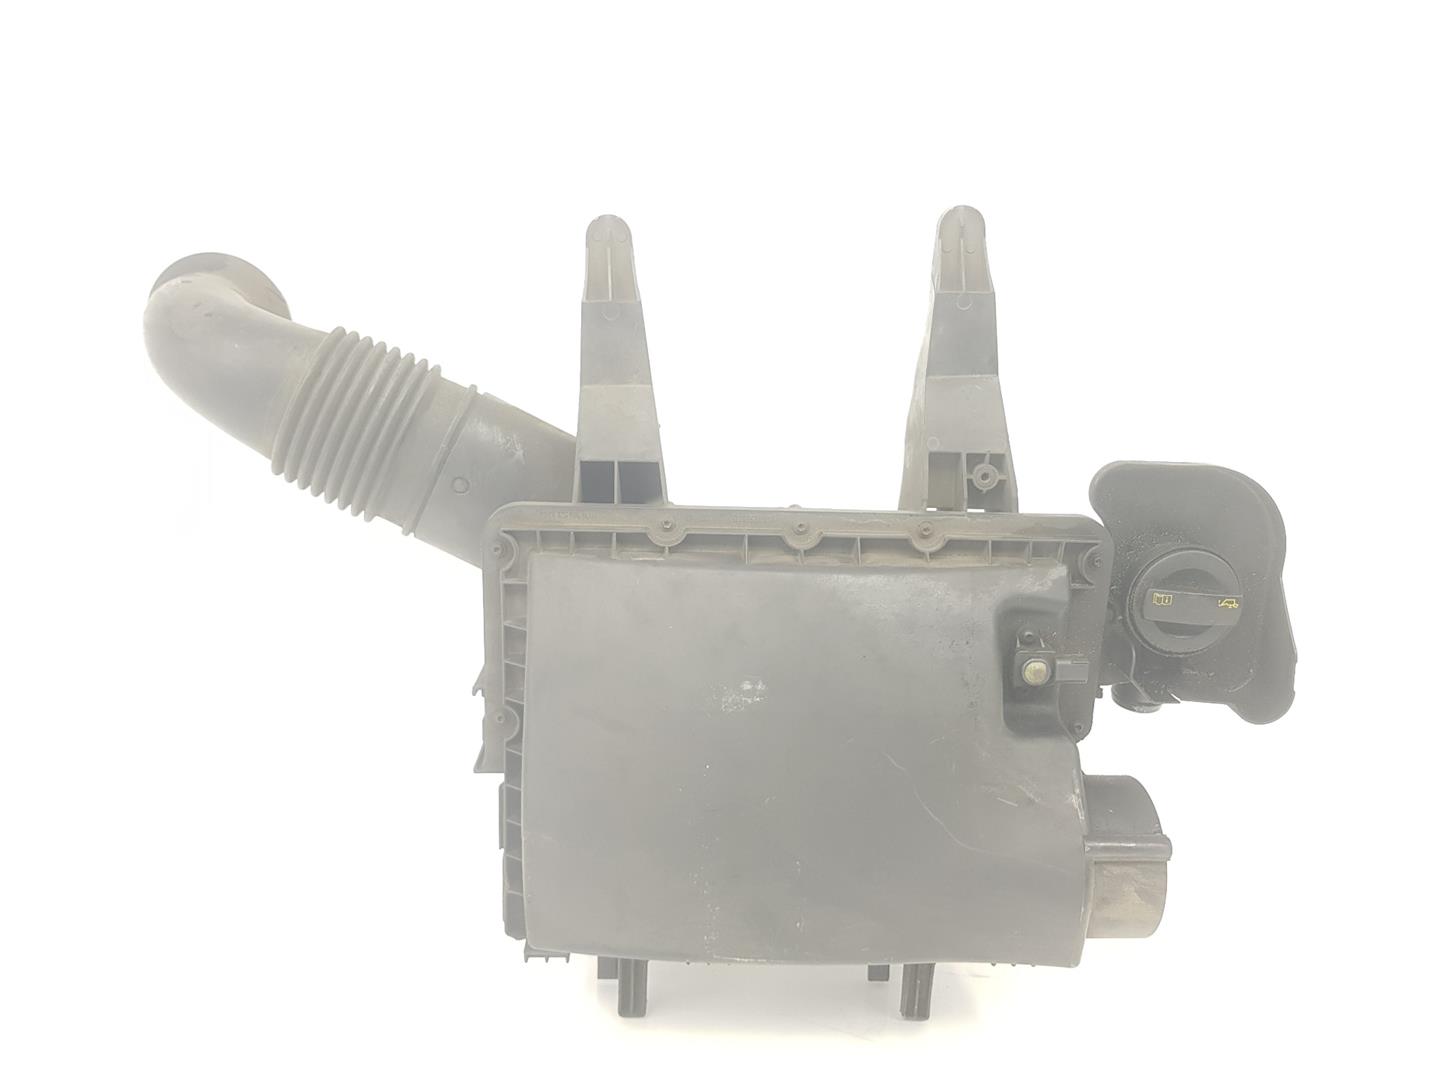 VOLKSWAGEN Crafter 1 generation Other Engine Compartment Parts 03L115295, 2E0129601D 24473590